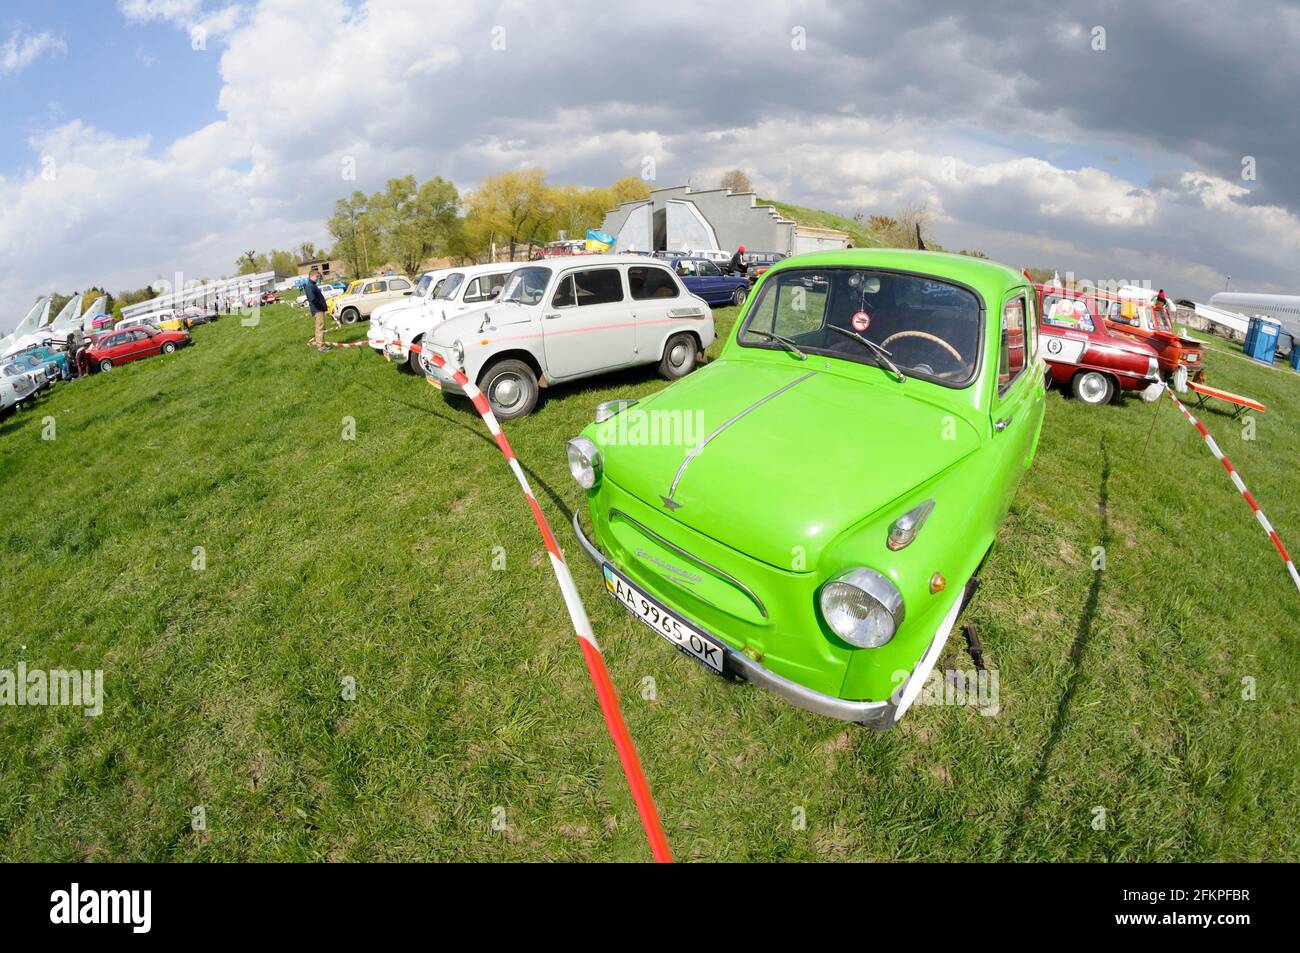 Made in USSR an old cars ZAZ 965 Zaporozhets parked. Festival OLD CAR Land. May 12, 2019. KIev, Ukraine Stock Photo